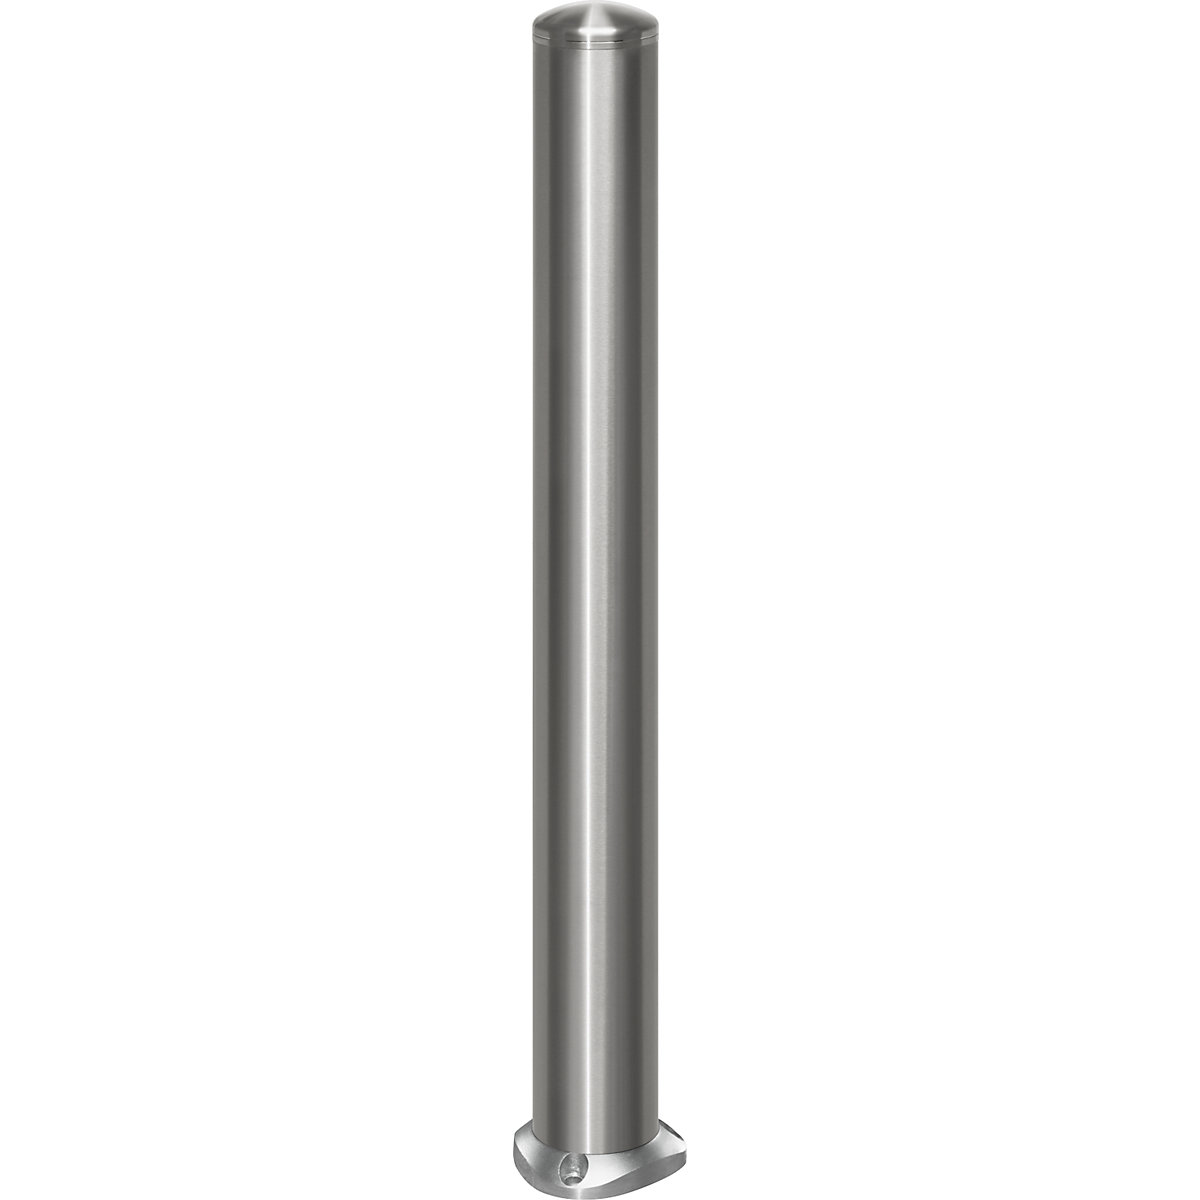 Stainless steel barrier post, with end cap, base plate to bolt in place, Ø 102 mm, self-righting